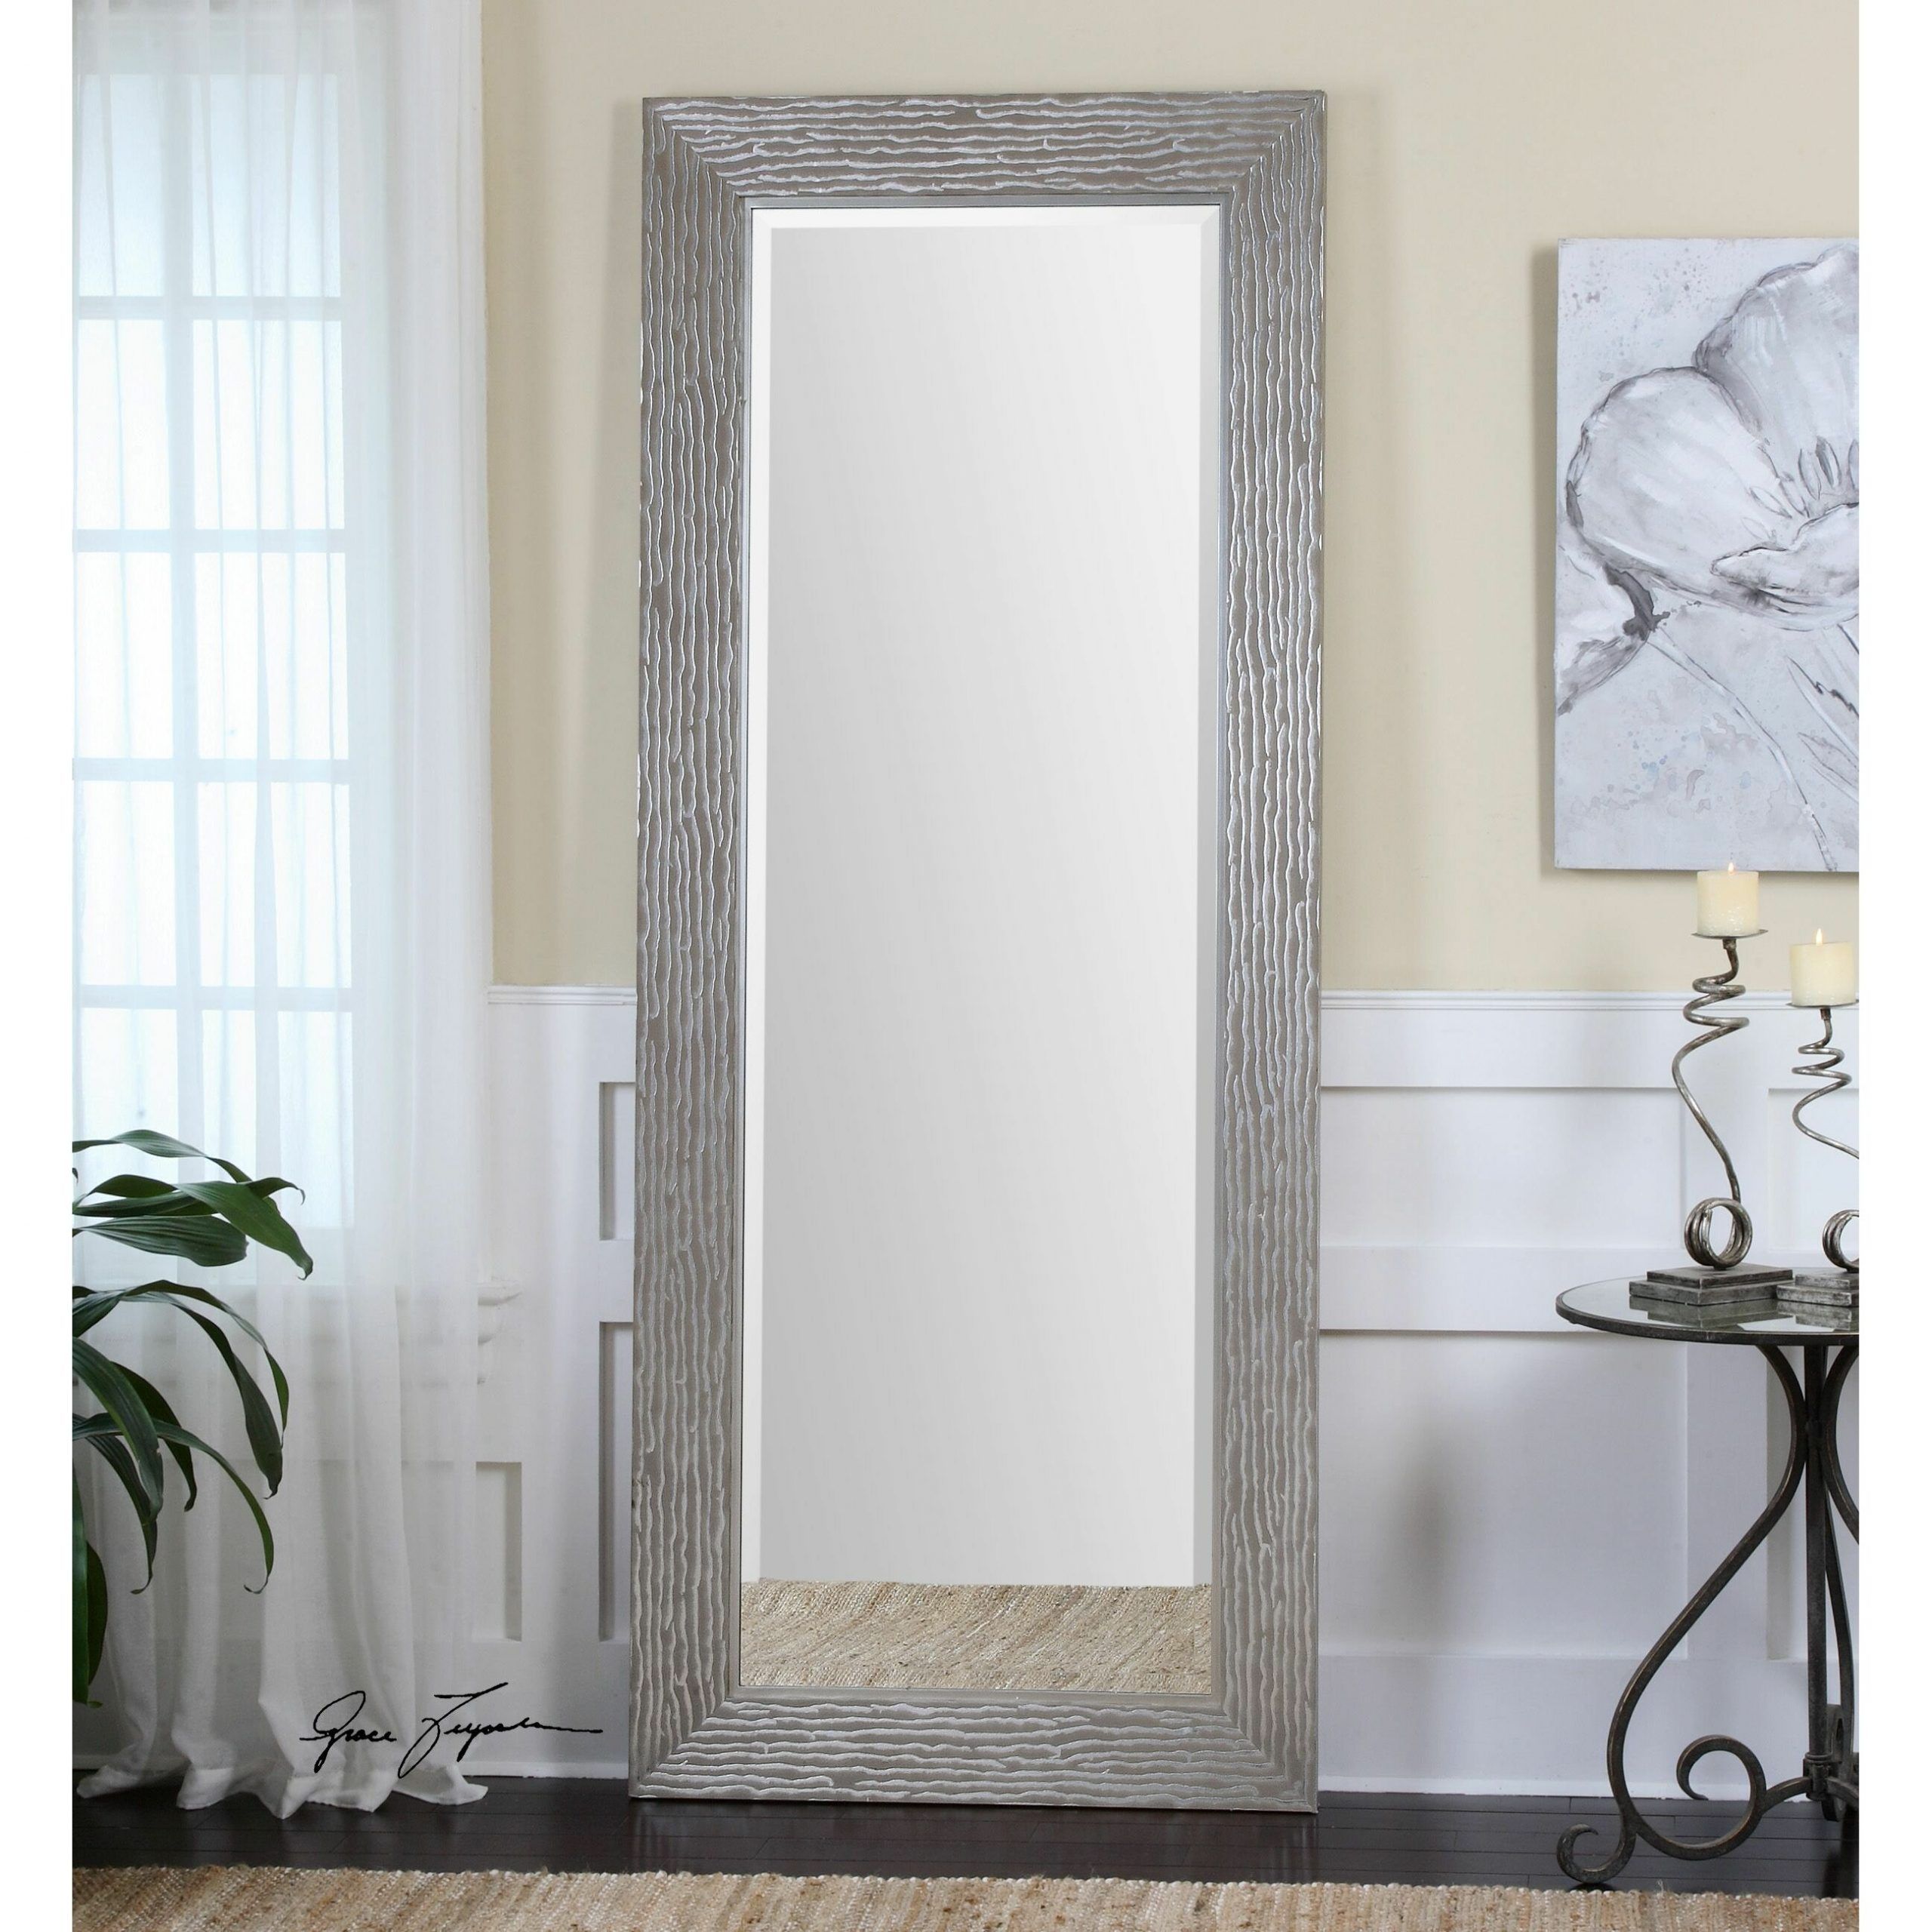 Uttermost Amadeus Large Wall Mirror & Reviews | Wayfair For Northend Wall Mirrors (View 3 of 15)